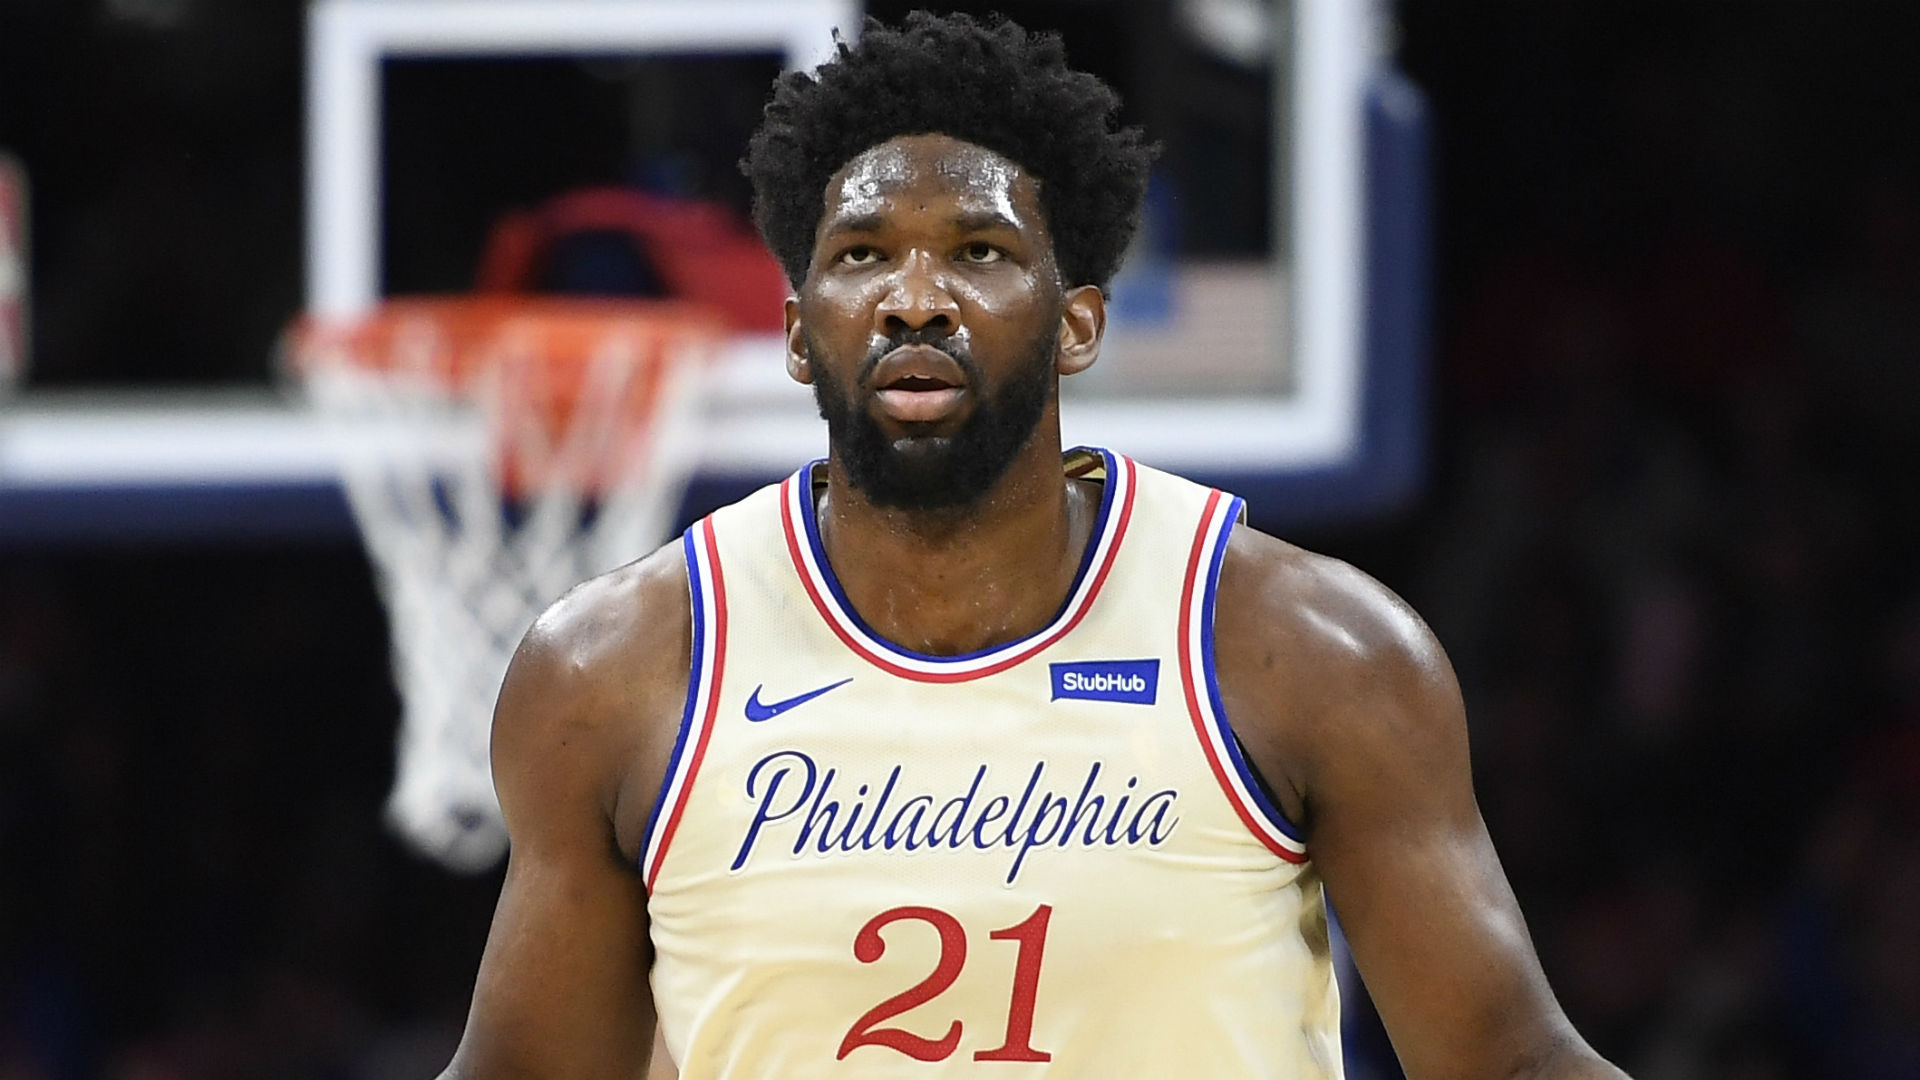 A middle-finger salute, plus using profane language during a television interview, has cost Joel Embiid $25,000.